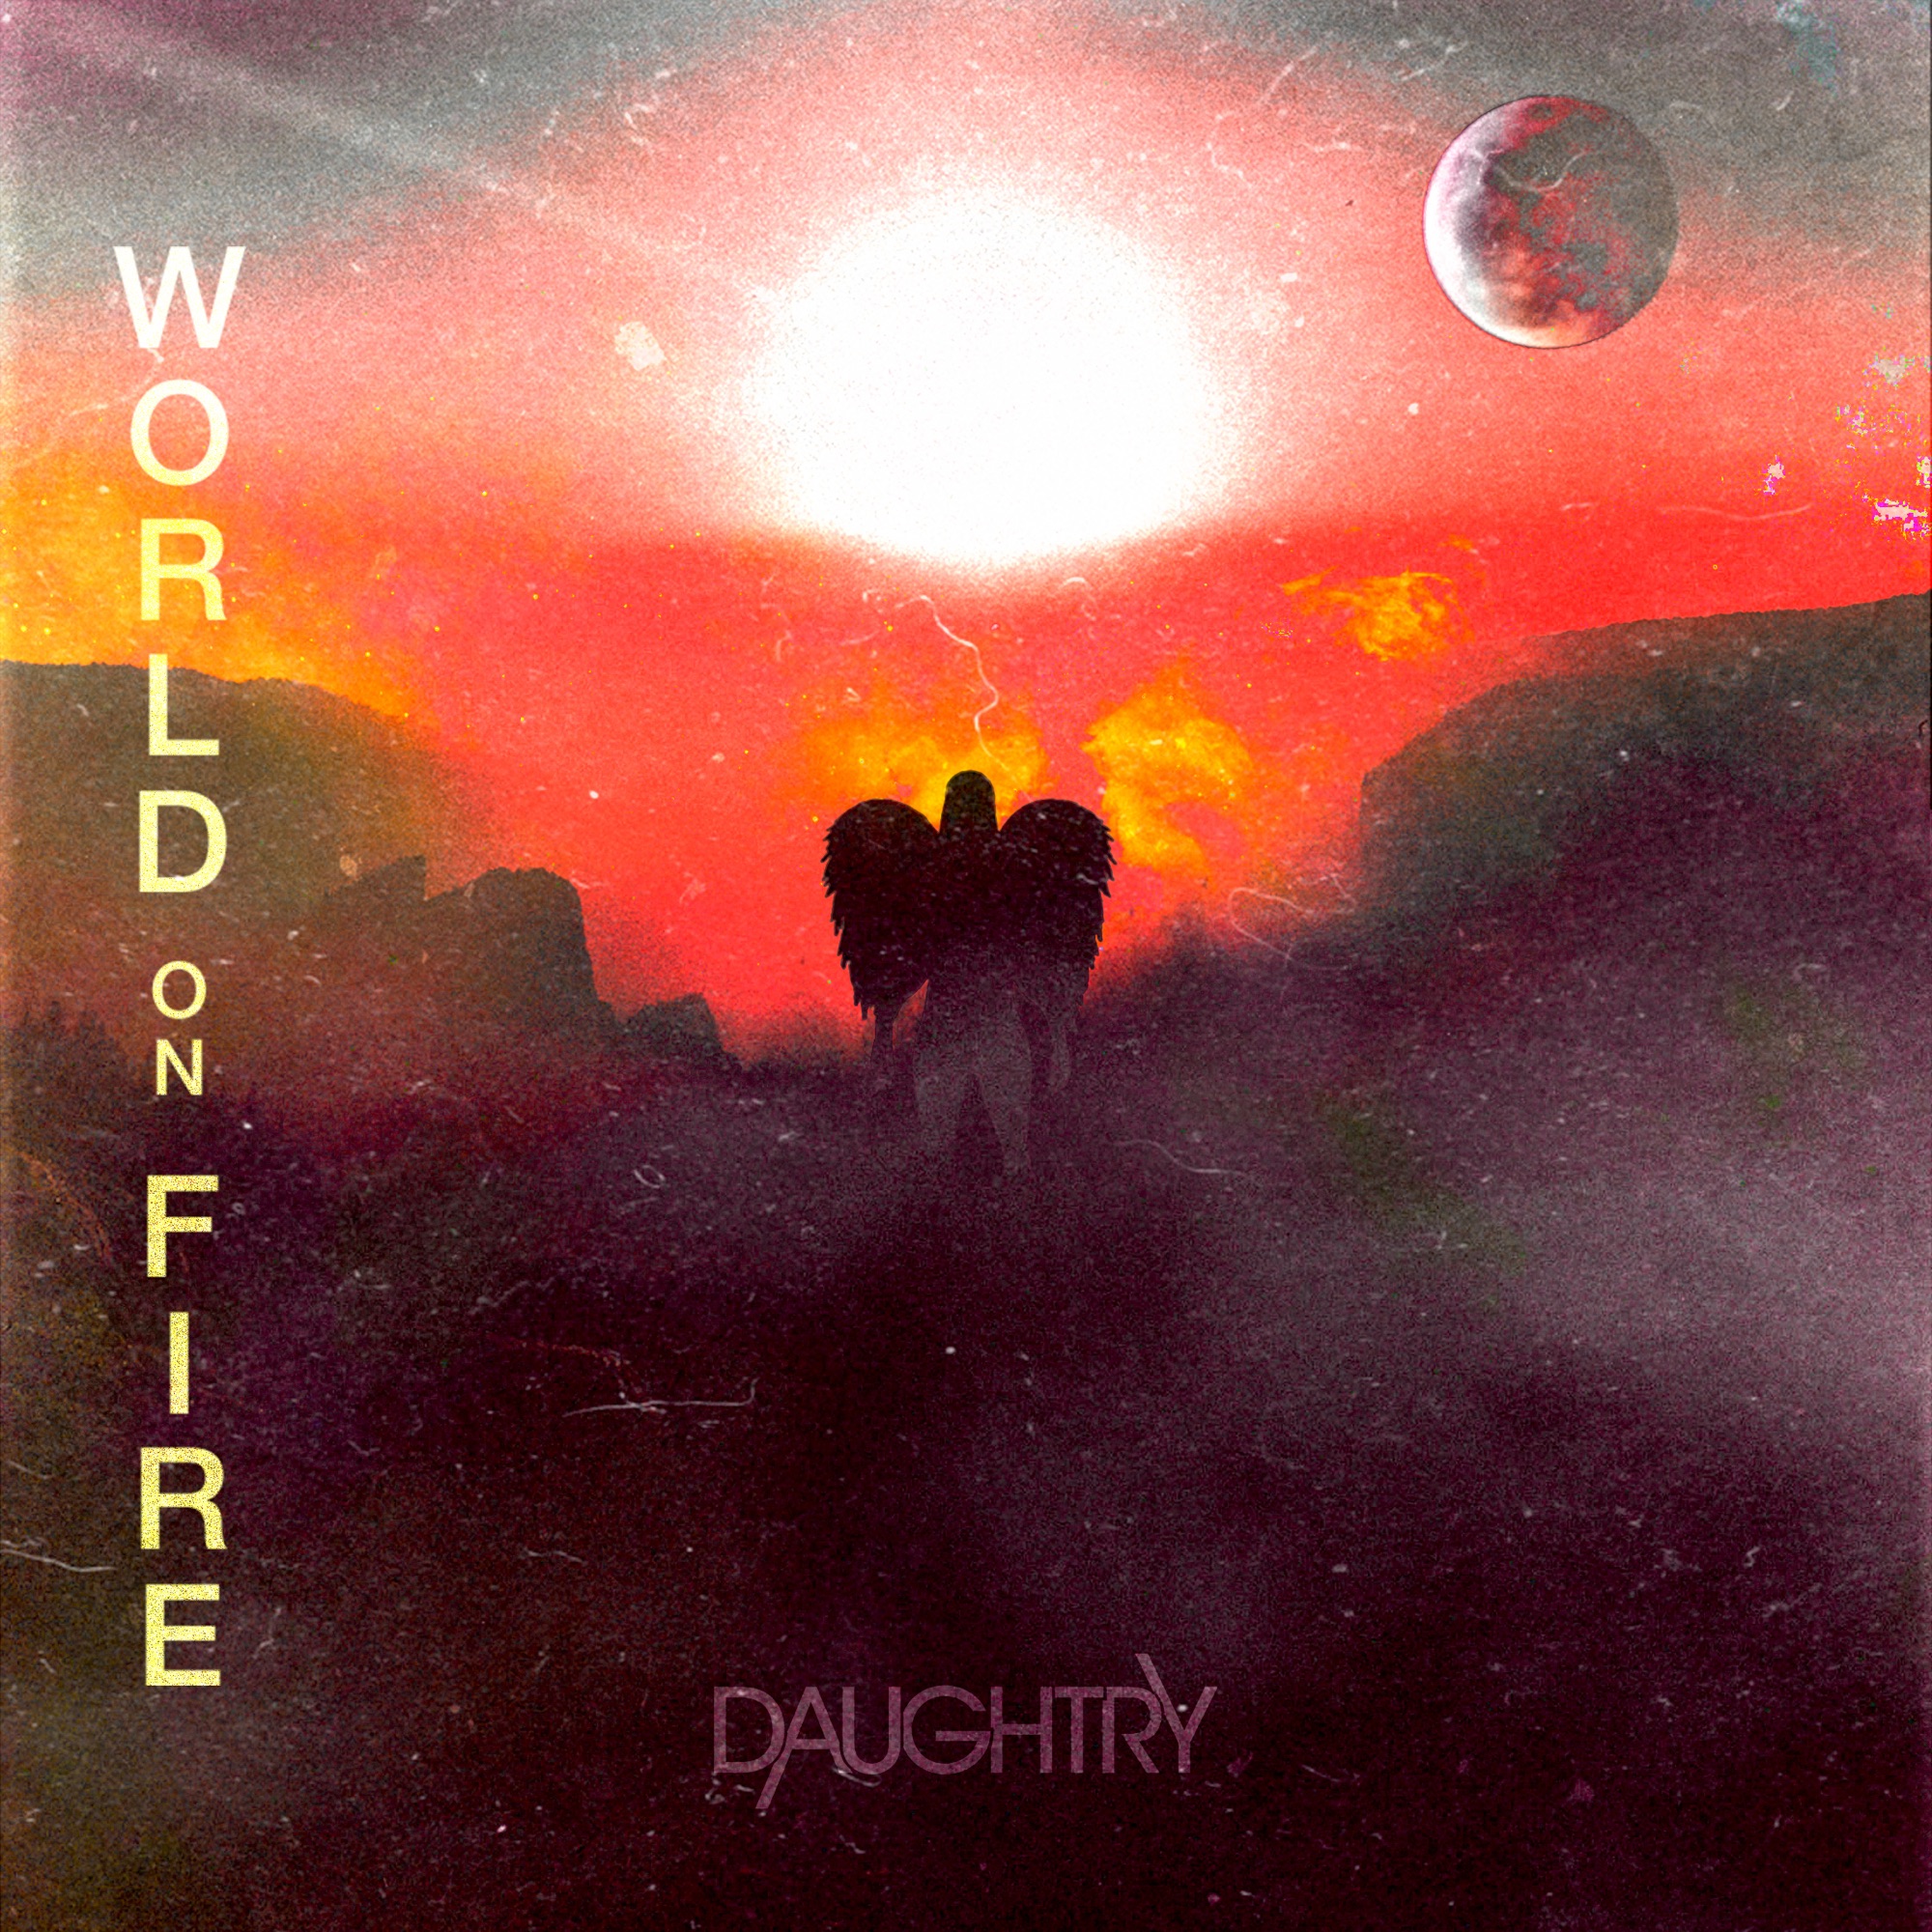 Art for World On Fire by Daughtry